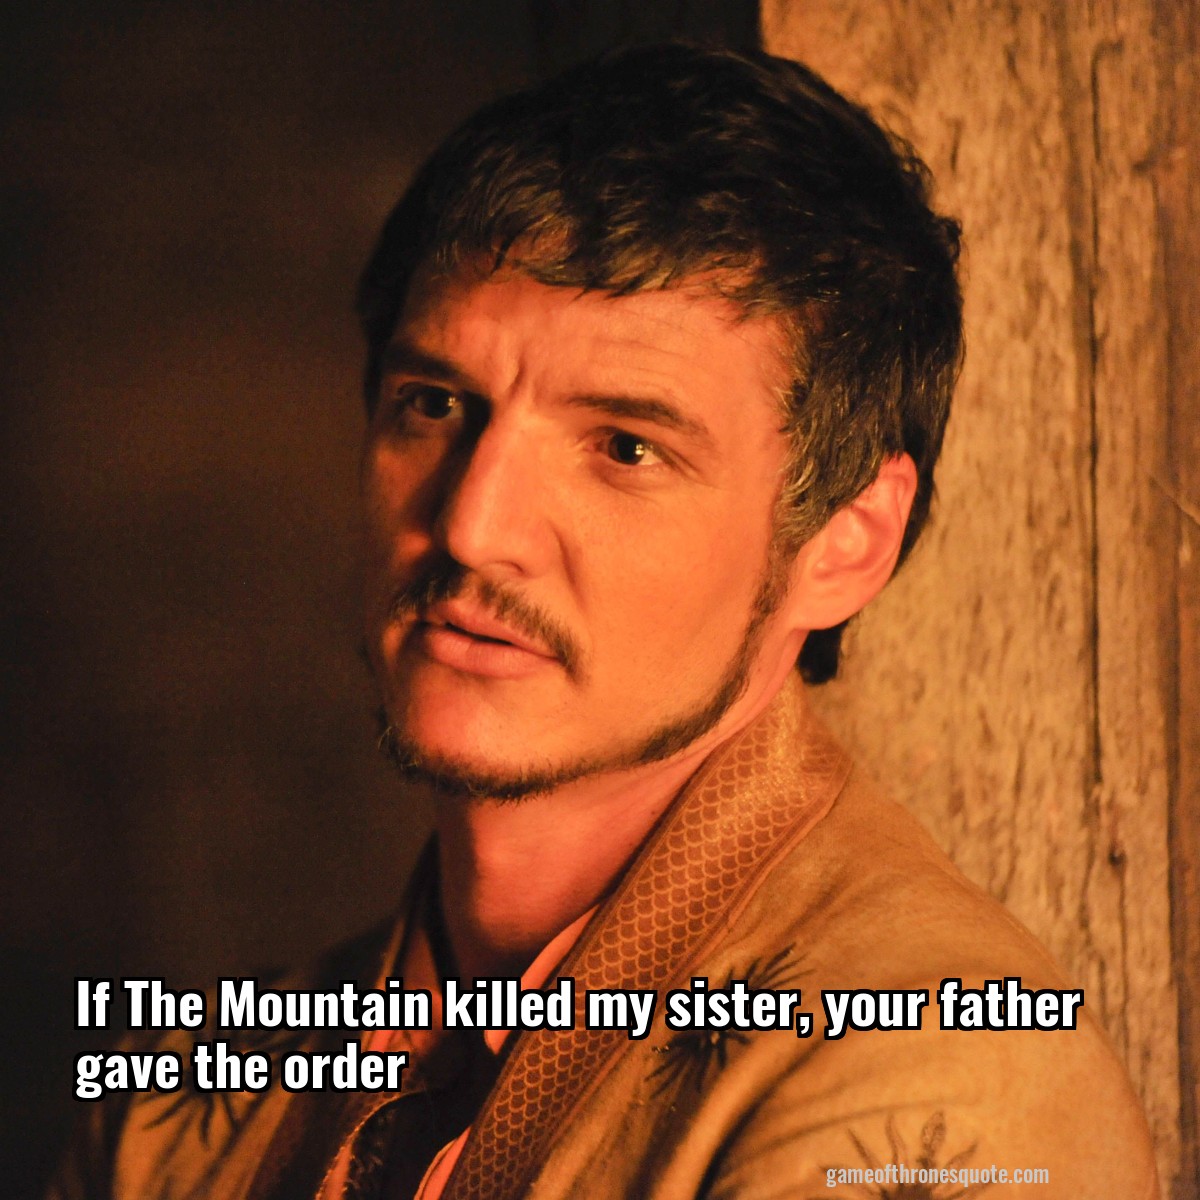 If The Mountain killed my sister, your father gave the order